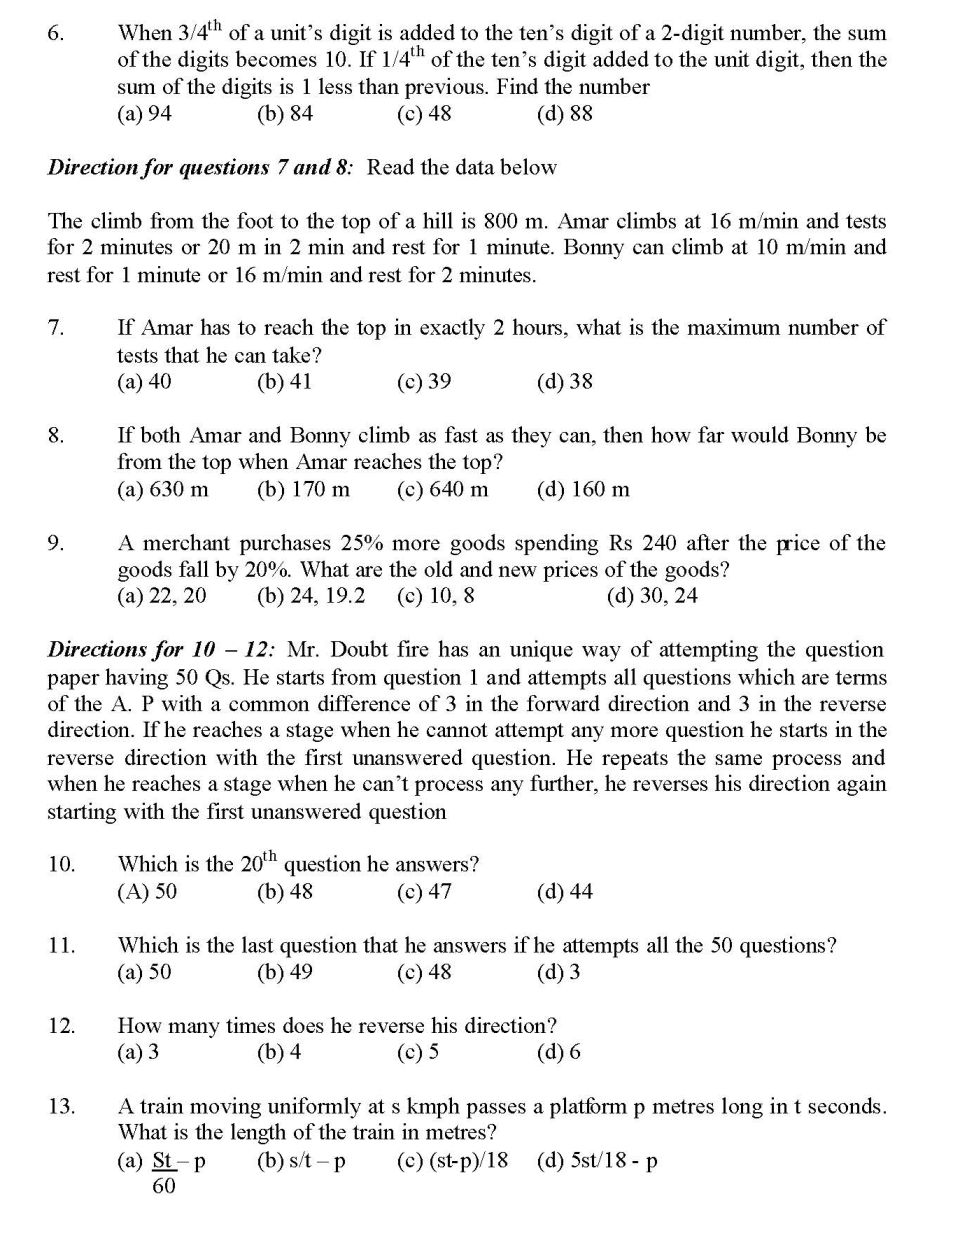 iift phd entrance question paper